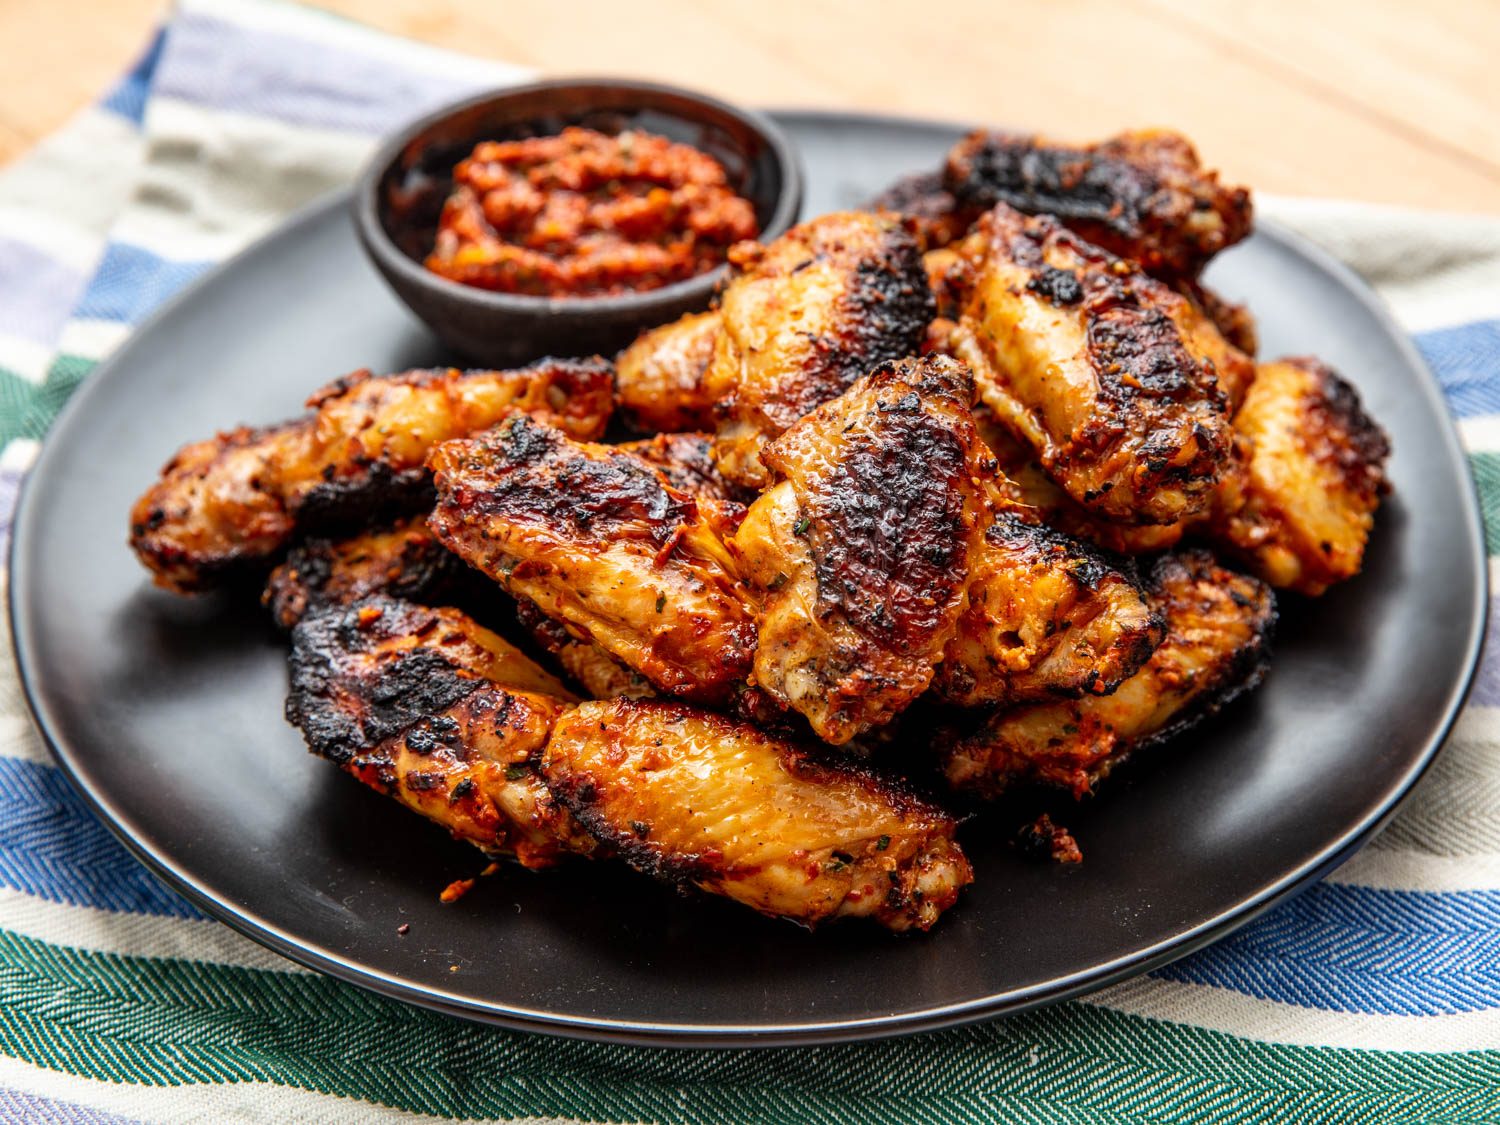 How to grill chicken wings